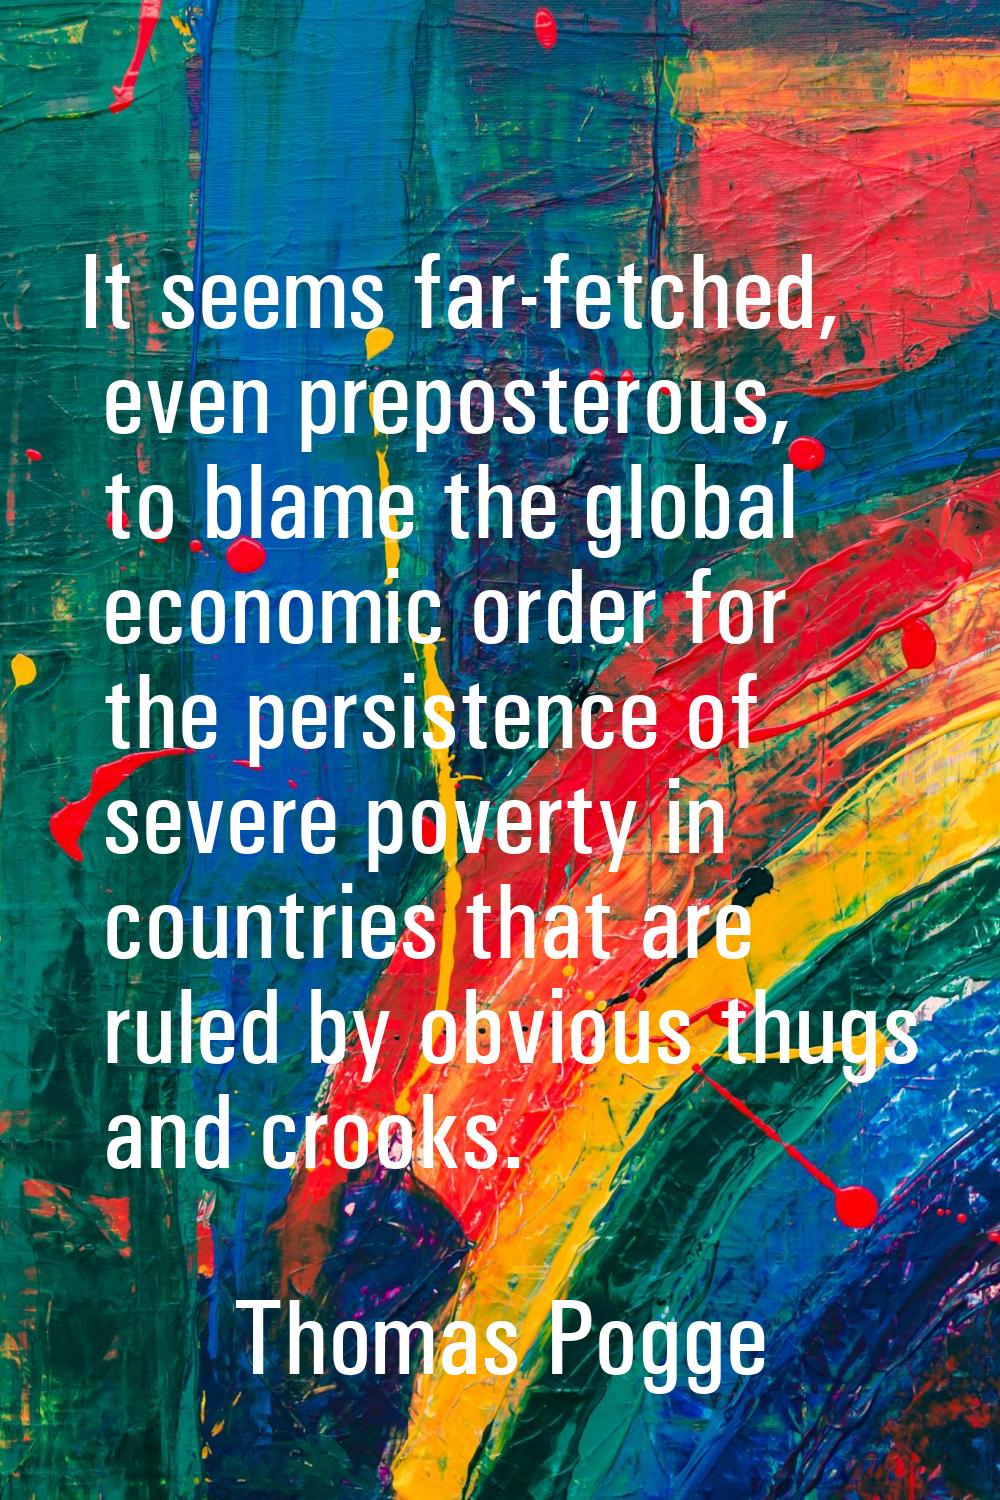 It seems far-fetched, even preposterous, to blame the global economic order for the persistence of 